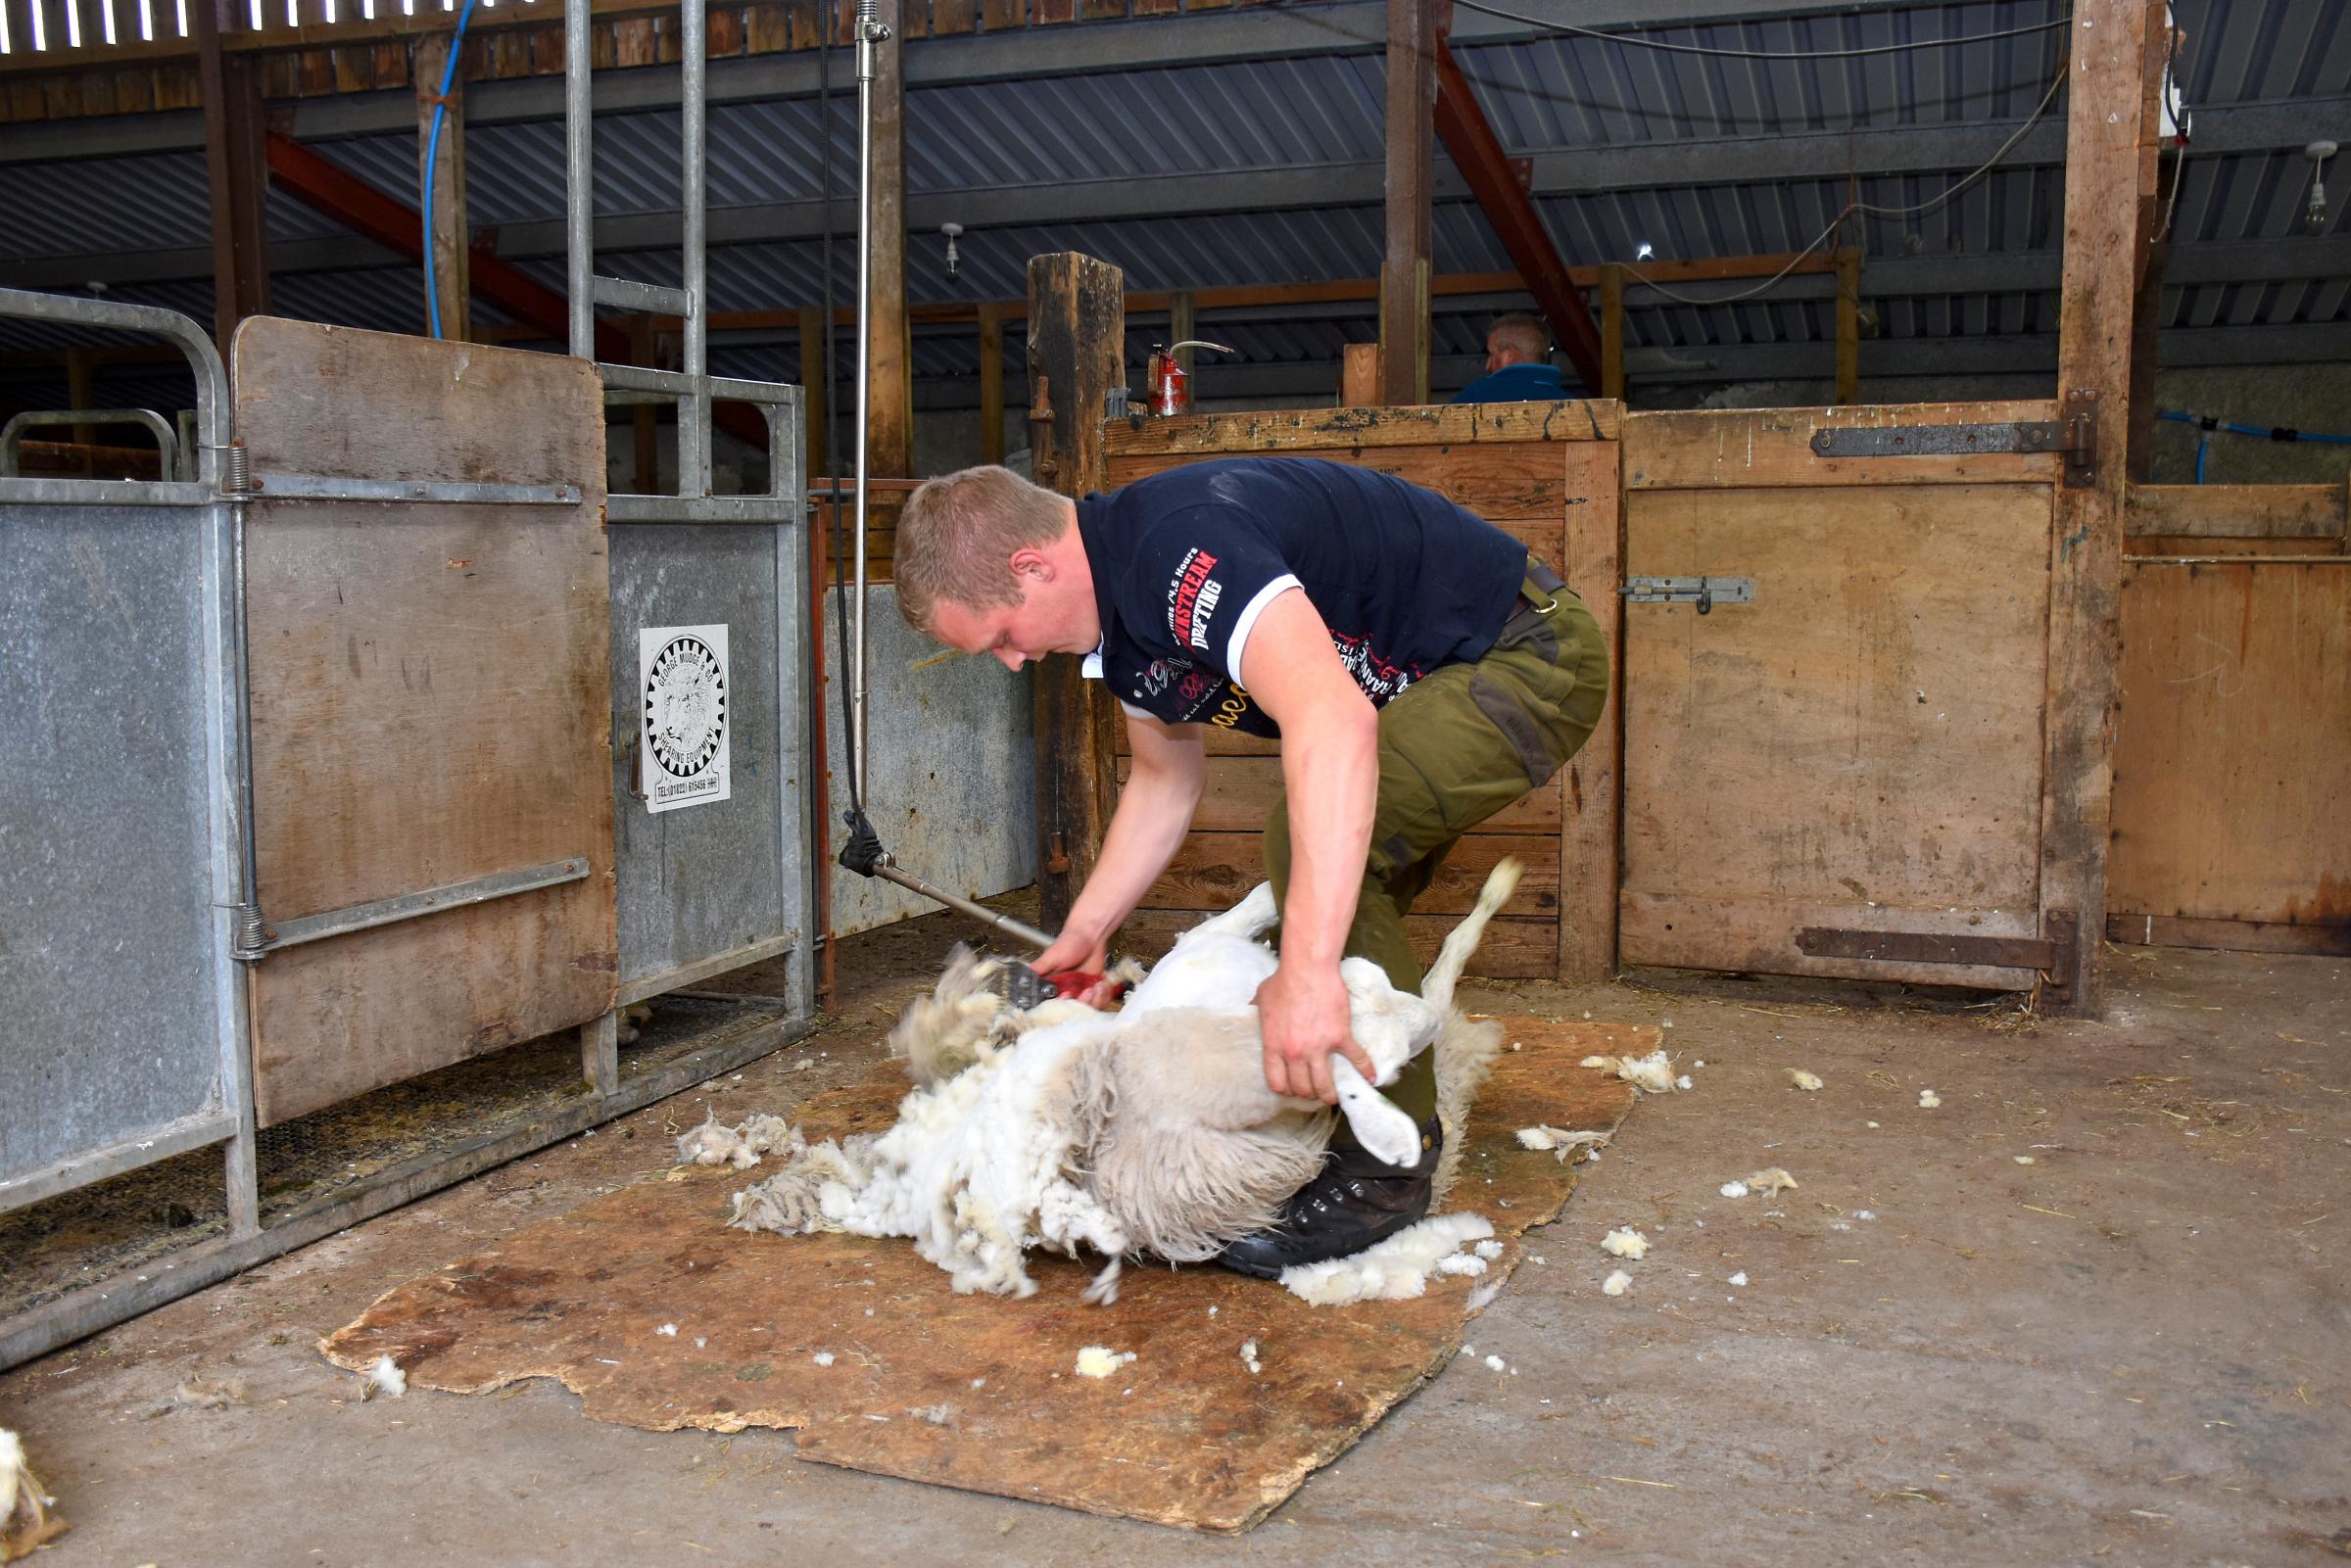 Farquhar is also a dab hand at sheep shearing. PICTURE: Chris McCullough